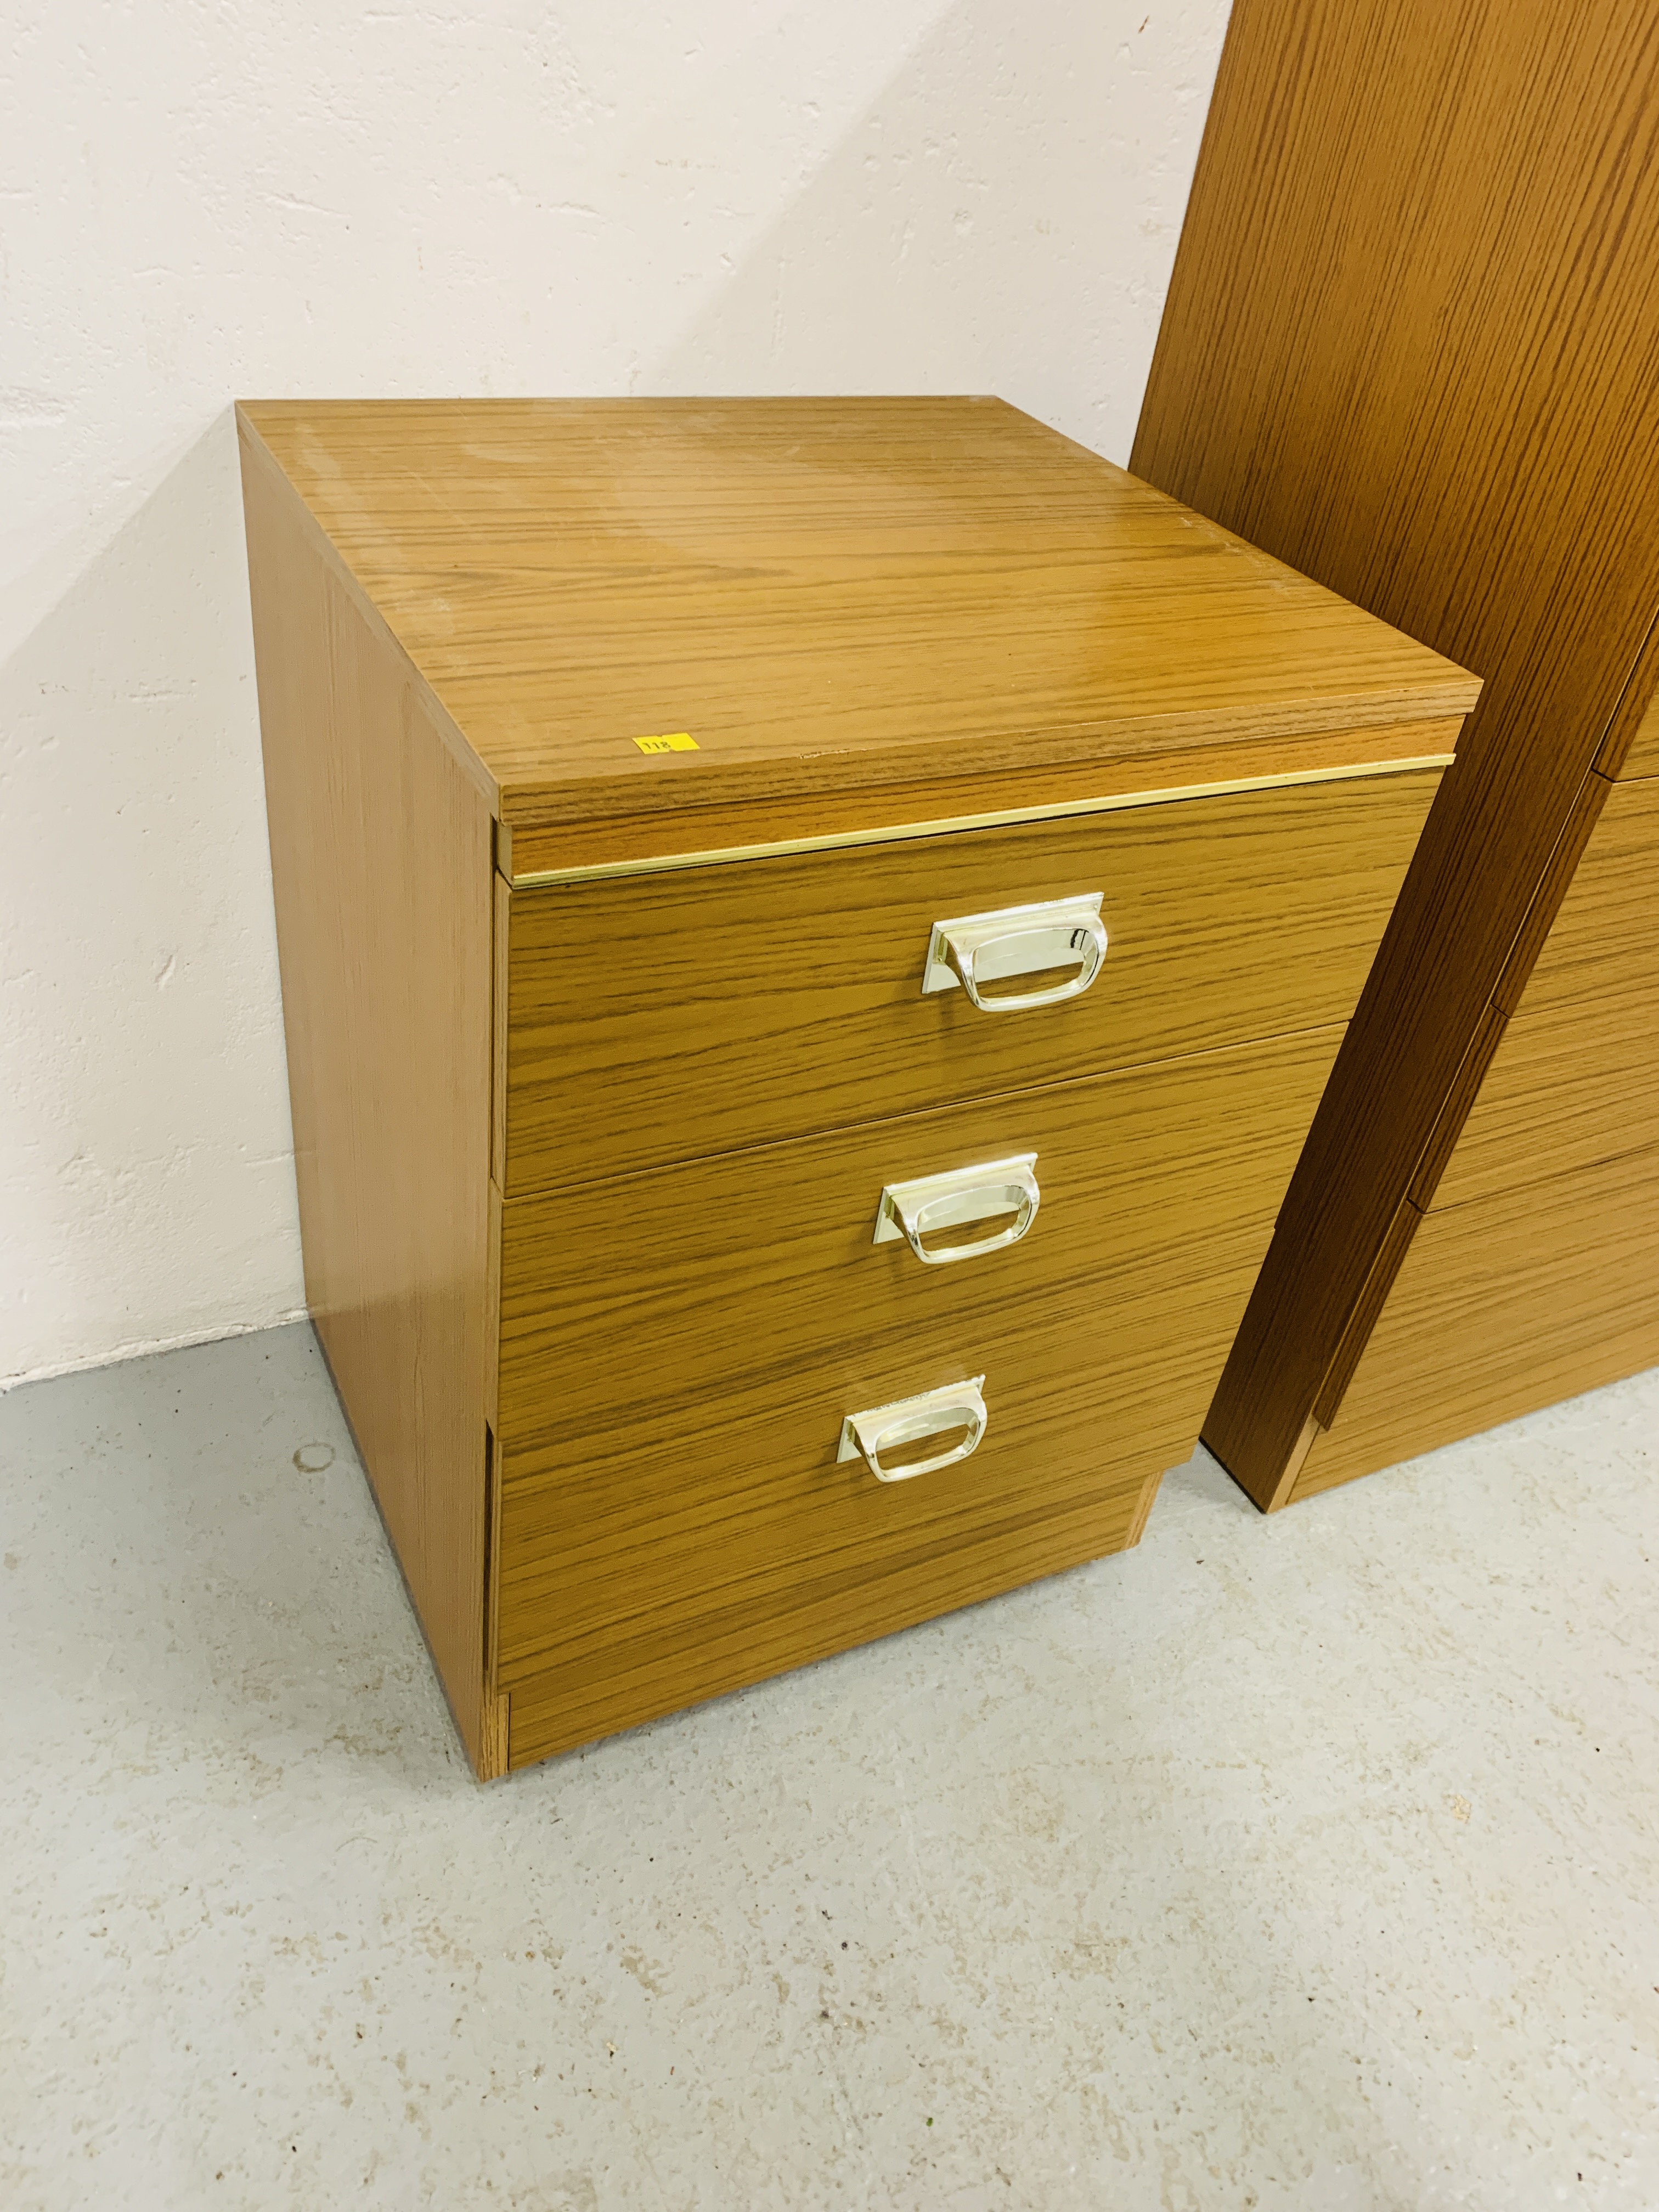 A MODERN WOOD GRAIN FINISH SIX DRAWER CHEST. WIDTH 77cm. HEIGHT 105cm. - Image 3 of 5